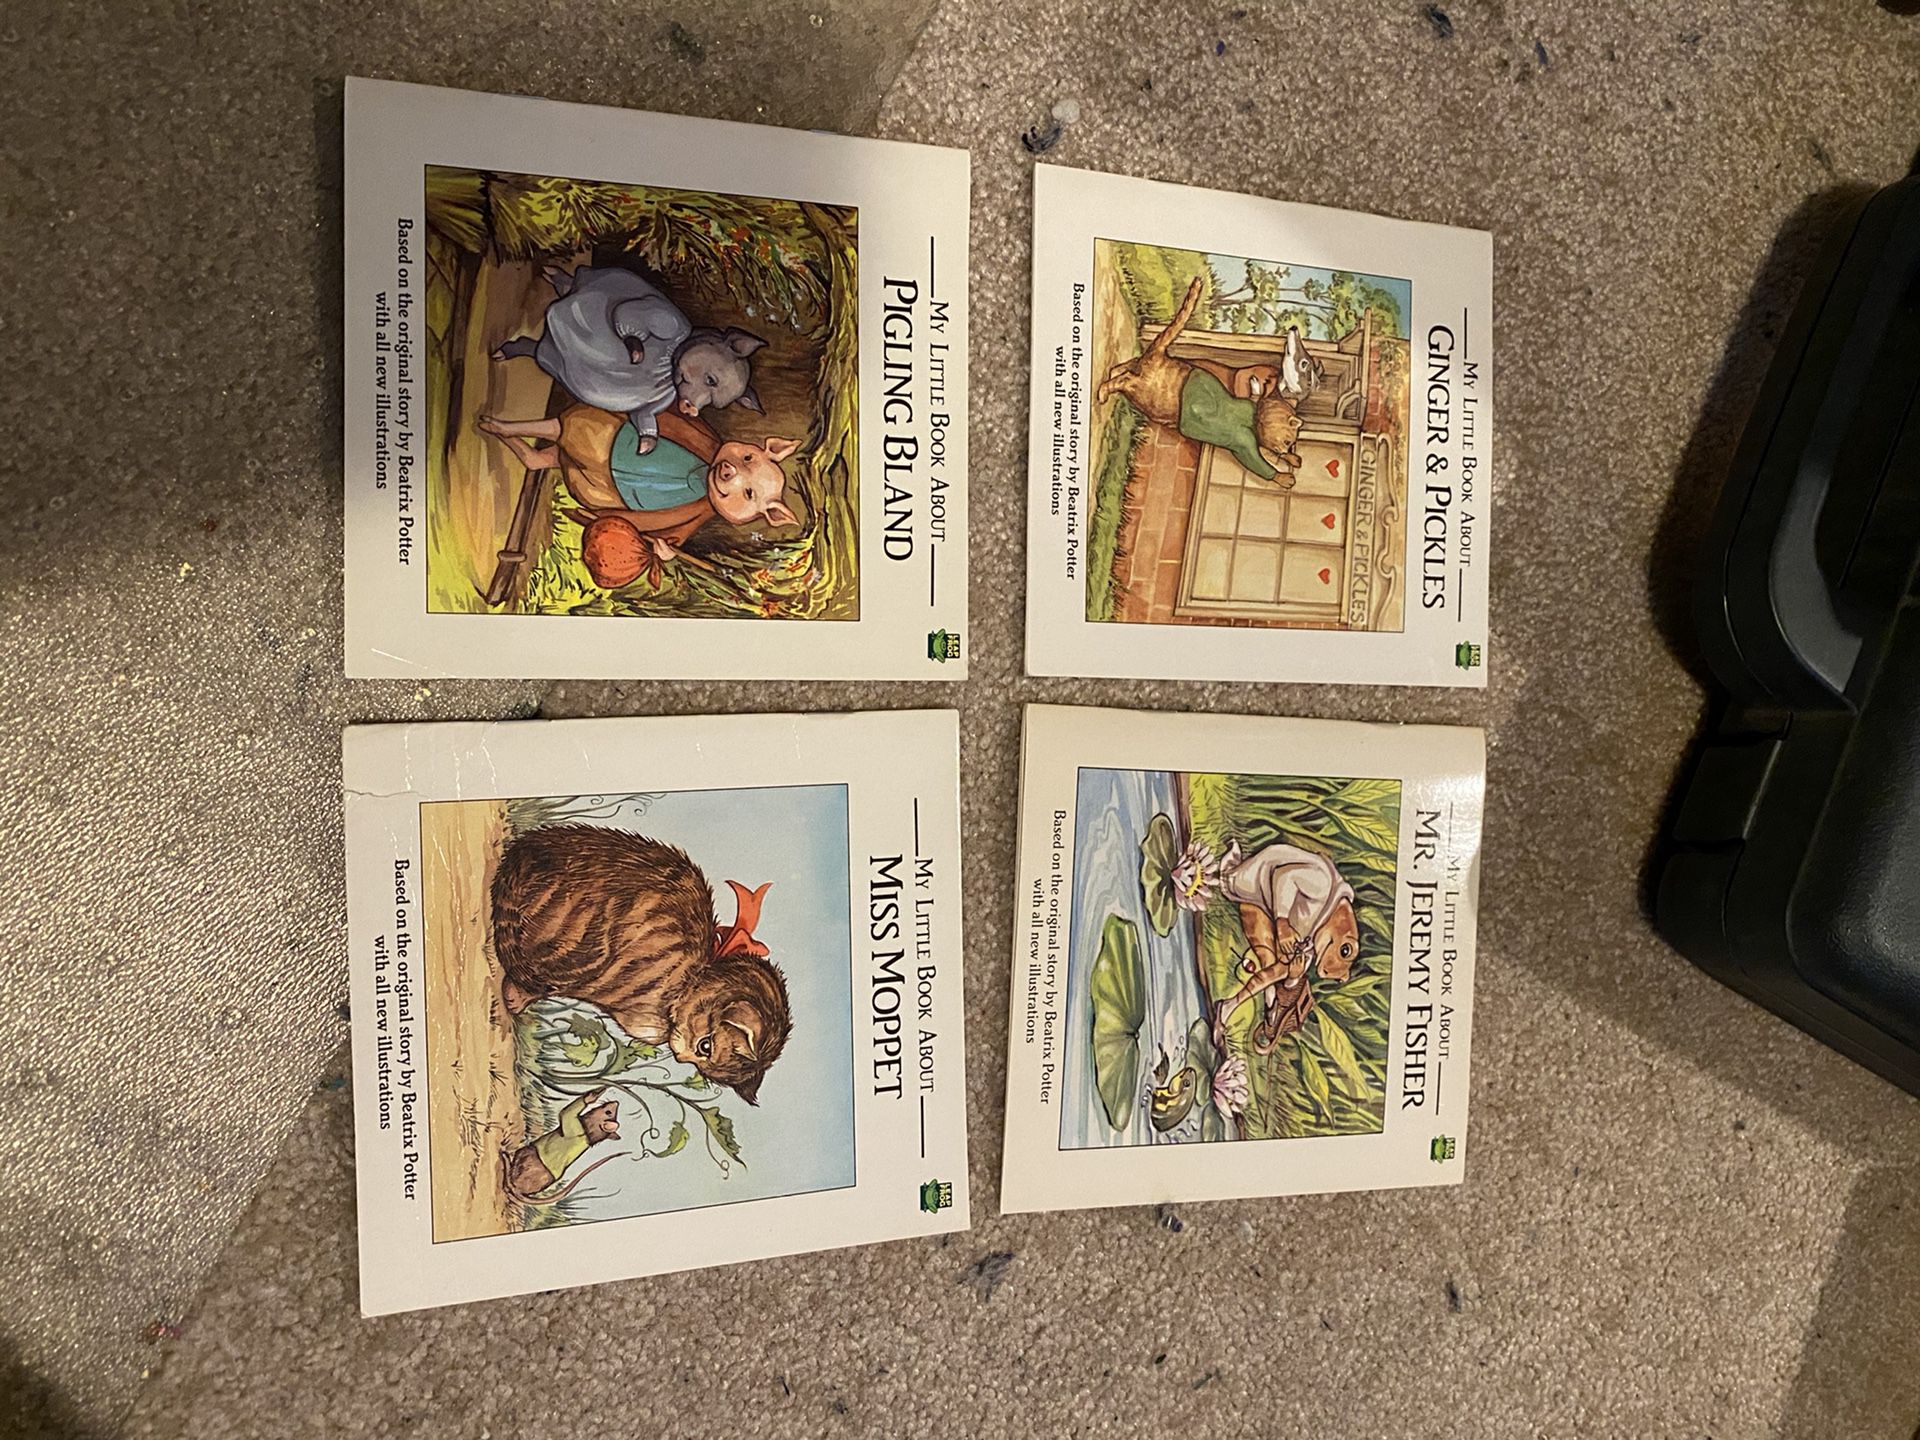 Lot of 4 children’s books 1991 My little Book about Miss Moppet Pigling Bland Mr. Jeremy Fisher Ginger & Pickles kids book vintage